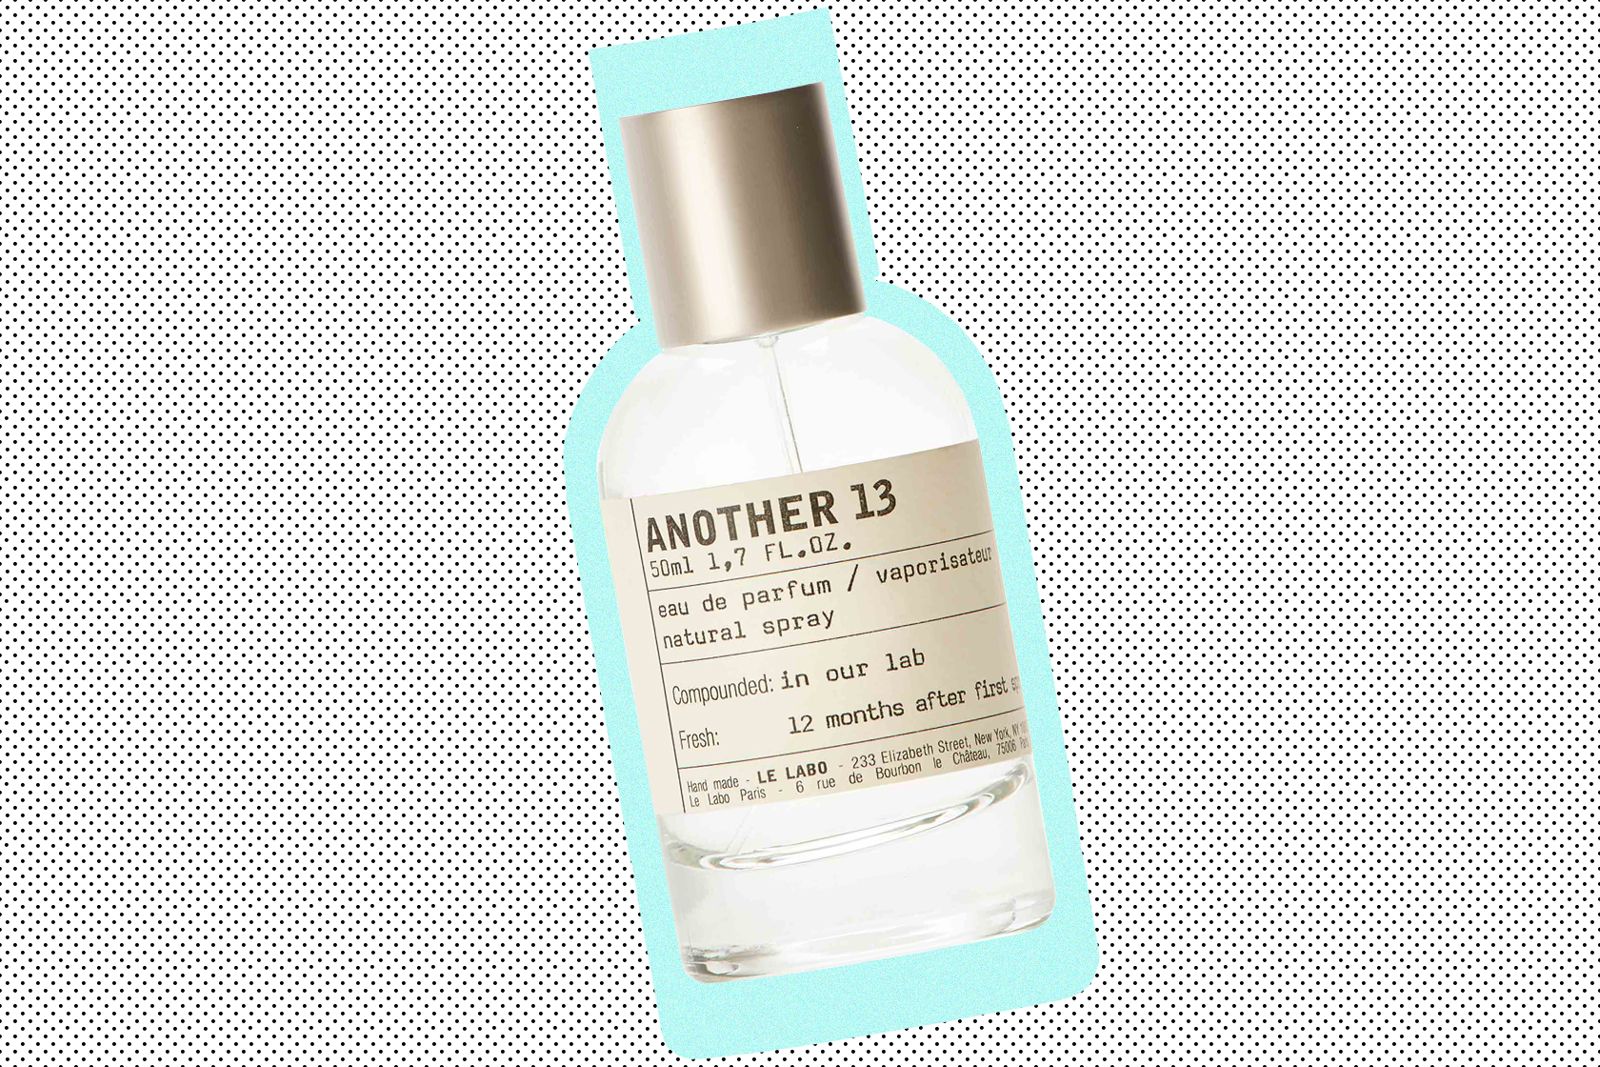 Another 13 отзывы. Сантал 13 le Labo. Le Labo another 13 100 ml. Дезодорант 50 мл NS-le Labo. Santal another 13.